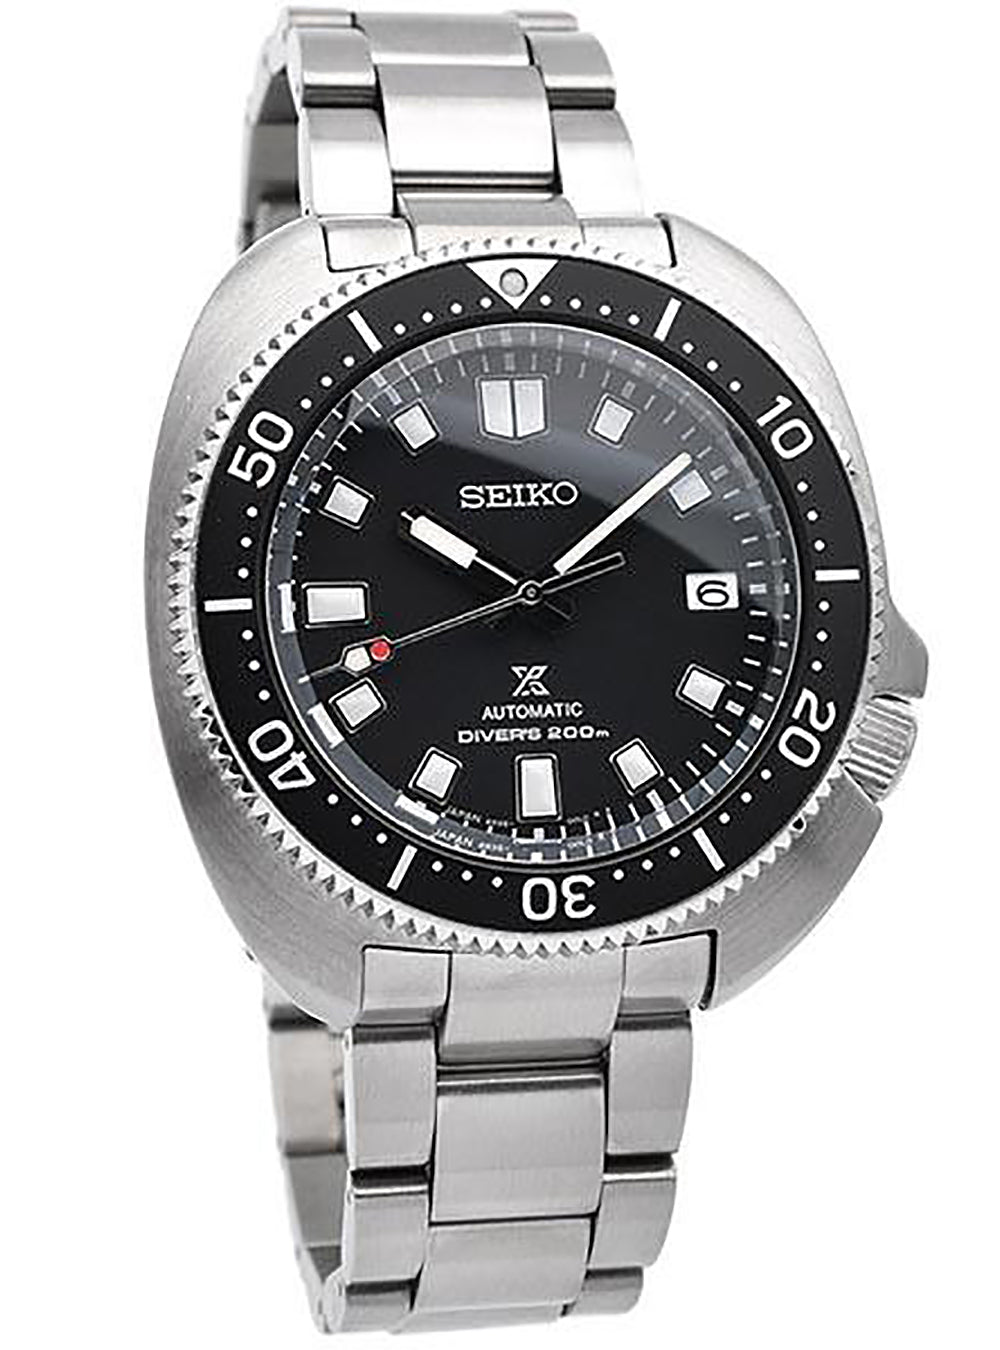 SEIKO PROSPEX 200M DIVER AUTOMATIC SBDC109 MADE IN JAPAN JDM – japan-select